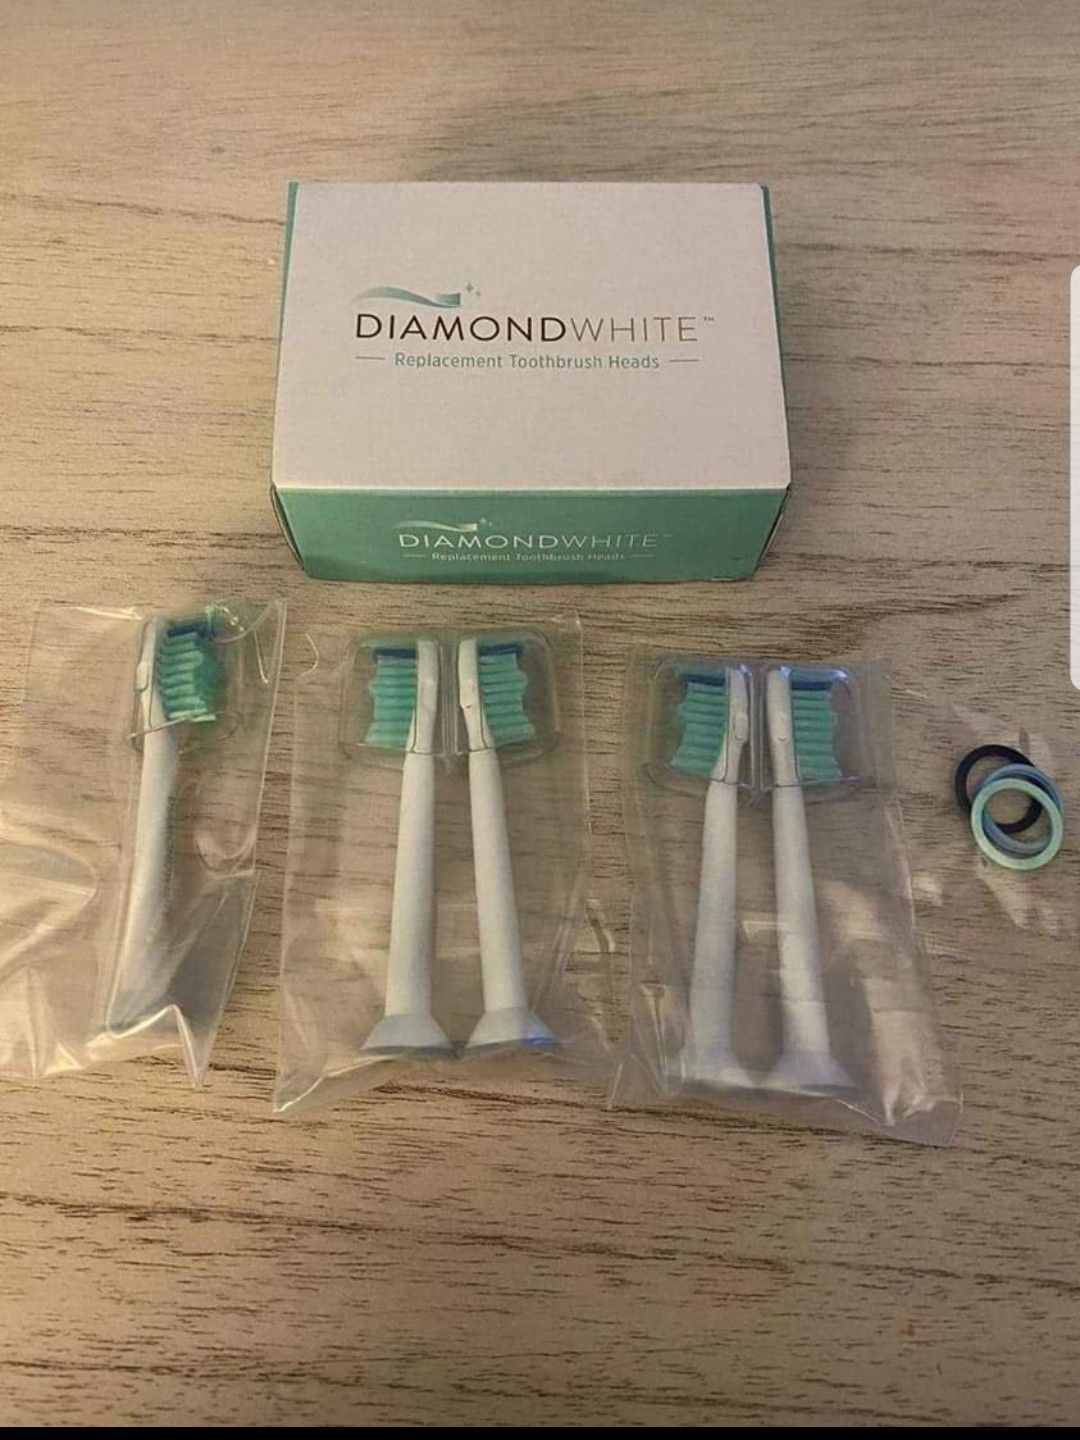 Replacement toothbrush heads